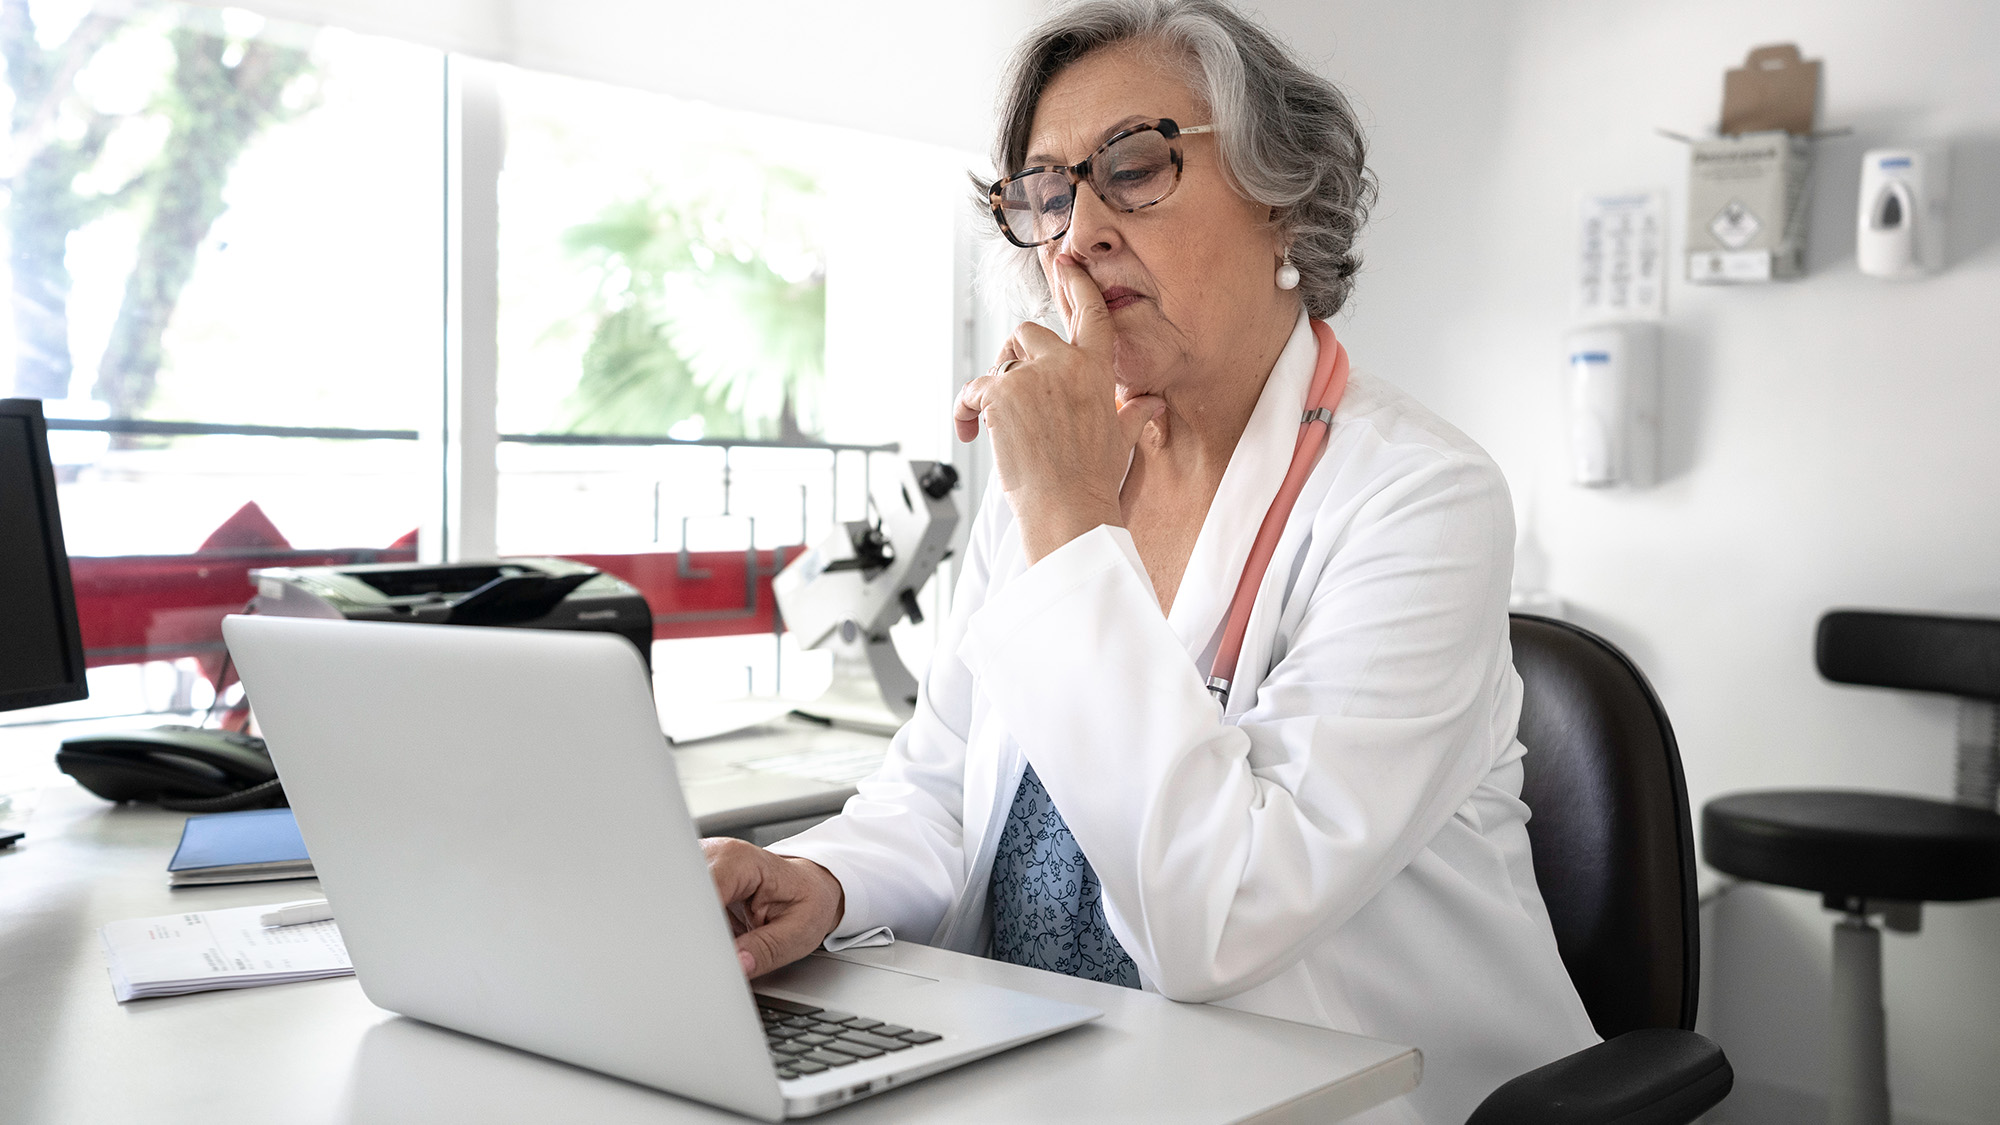 physician looking at a laptop pensively